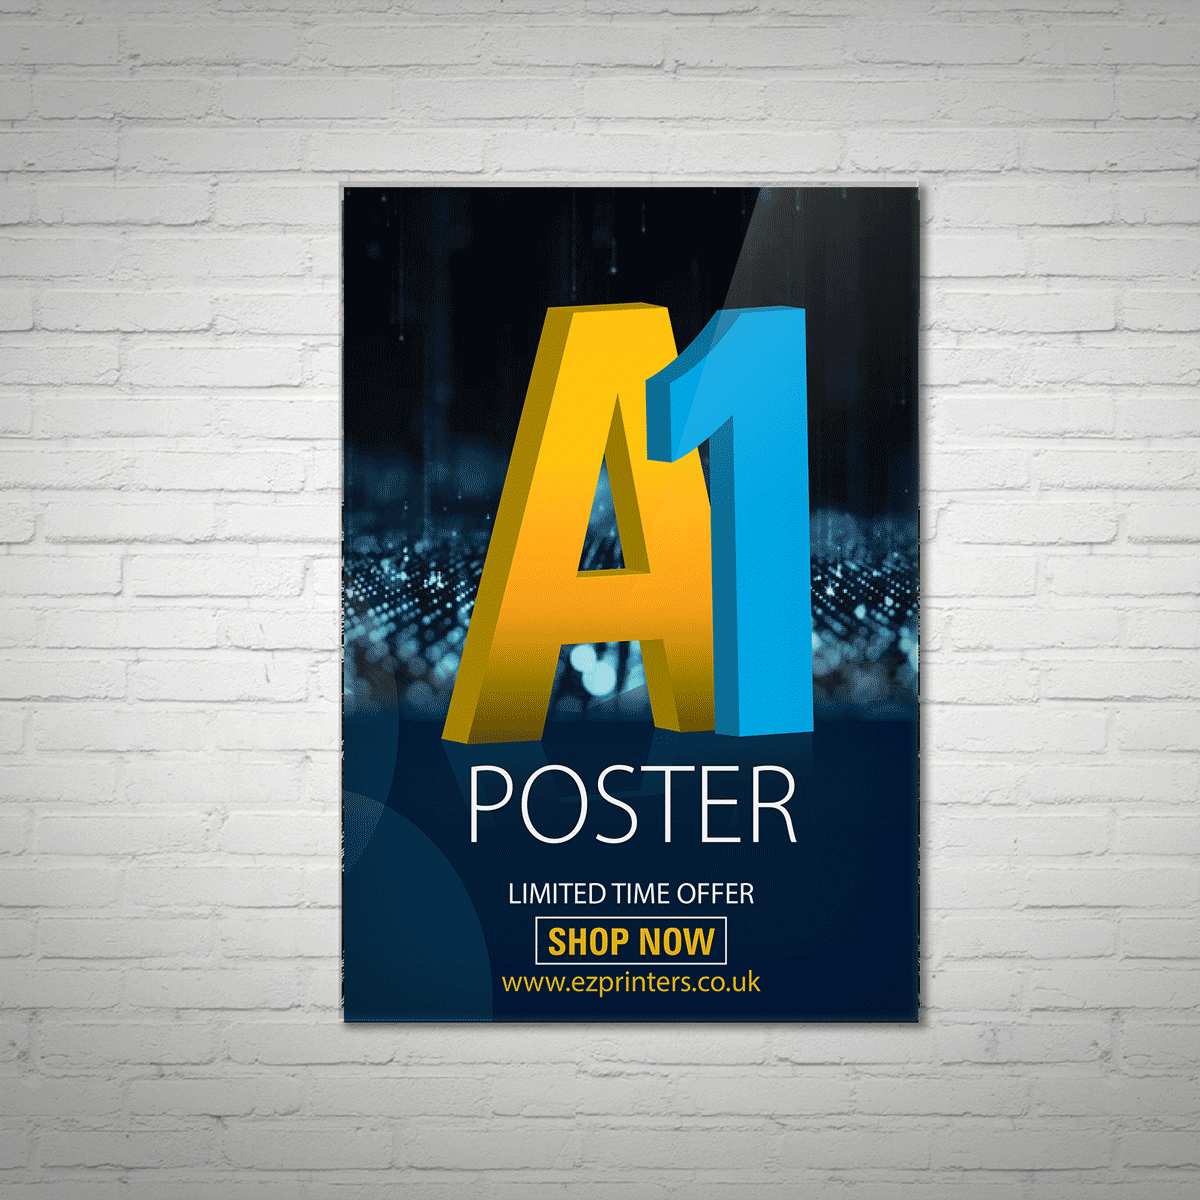 cheap_instant_last_minute_quality_hi_gloss_a1_poster_printing_shop_in_east_london_shoreditch